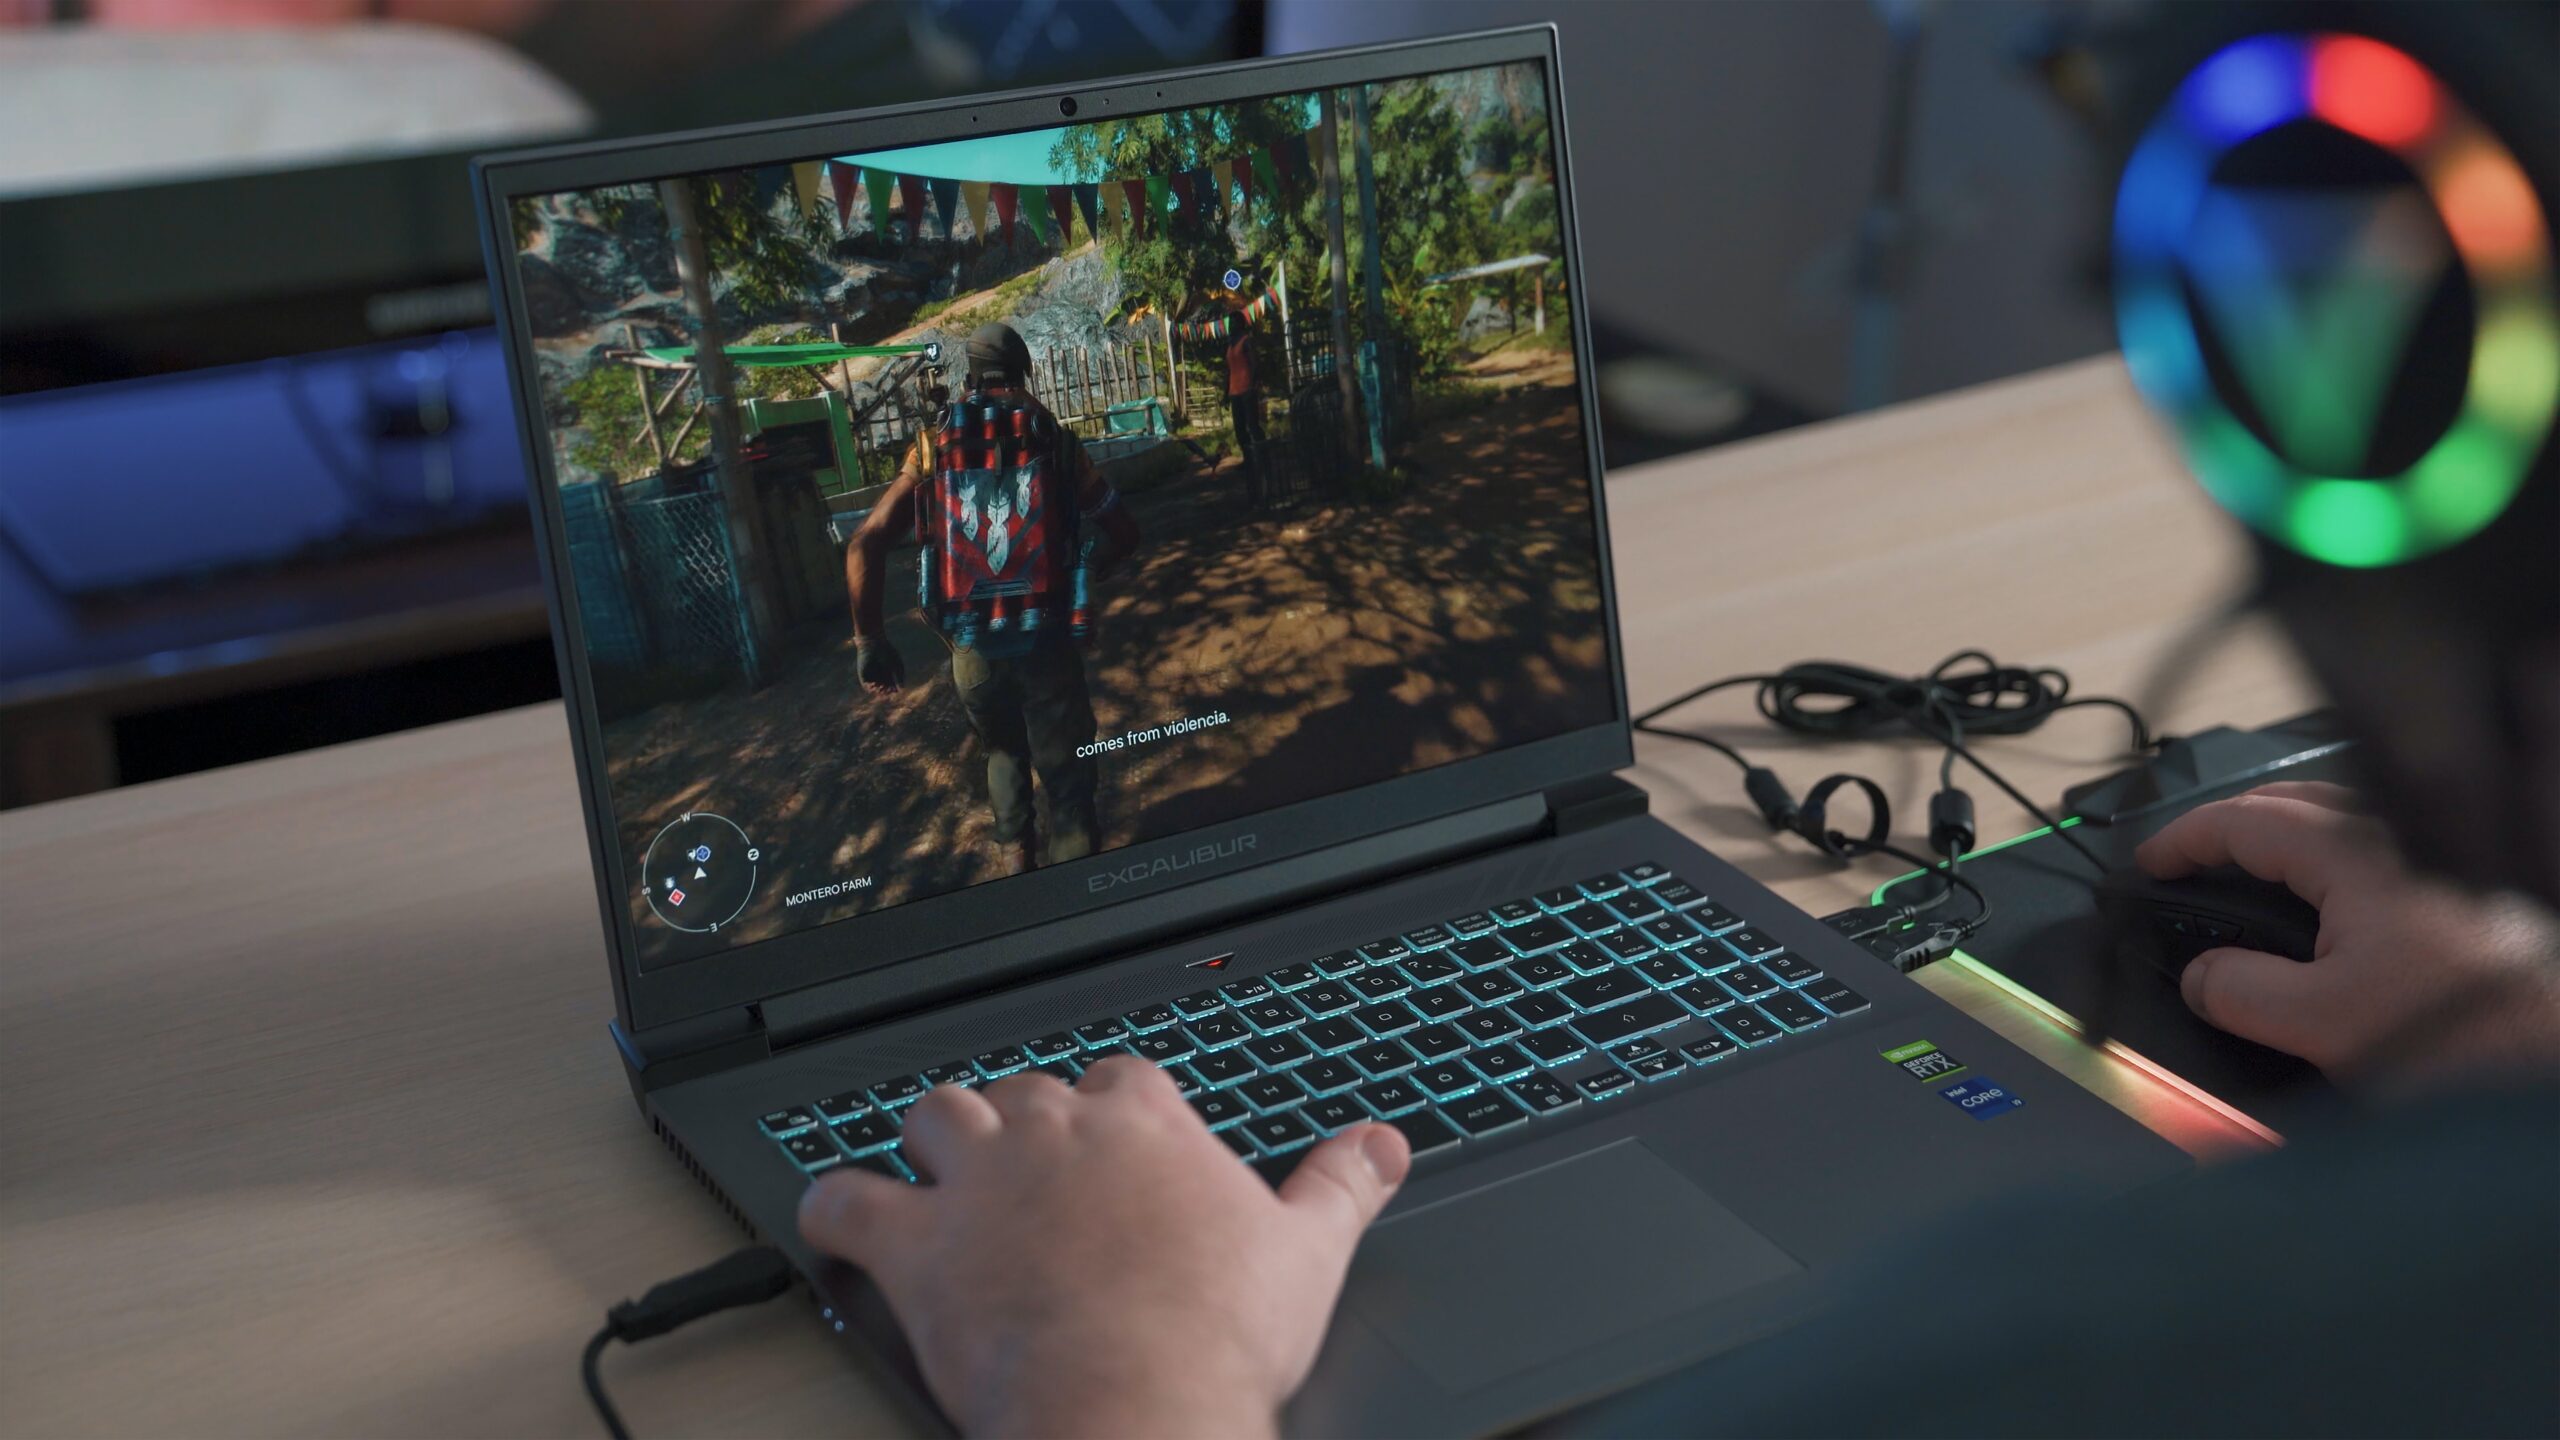 Can gaming laptops be used for college?